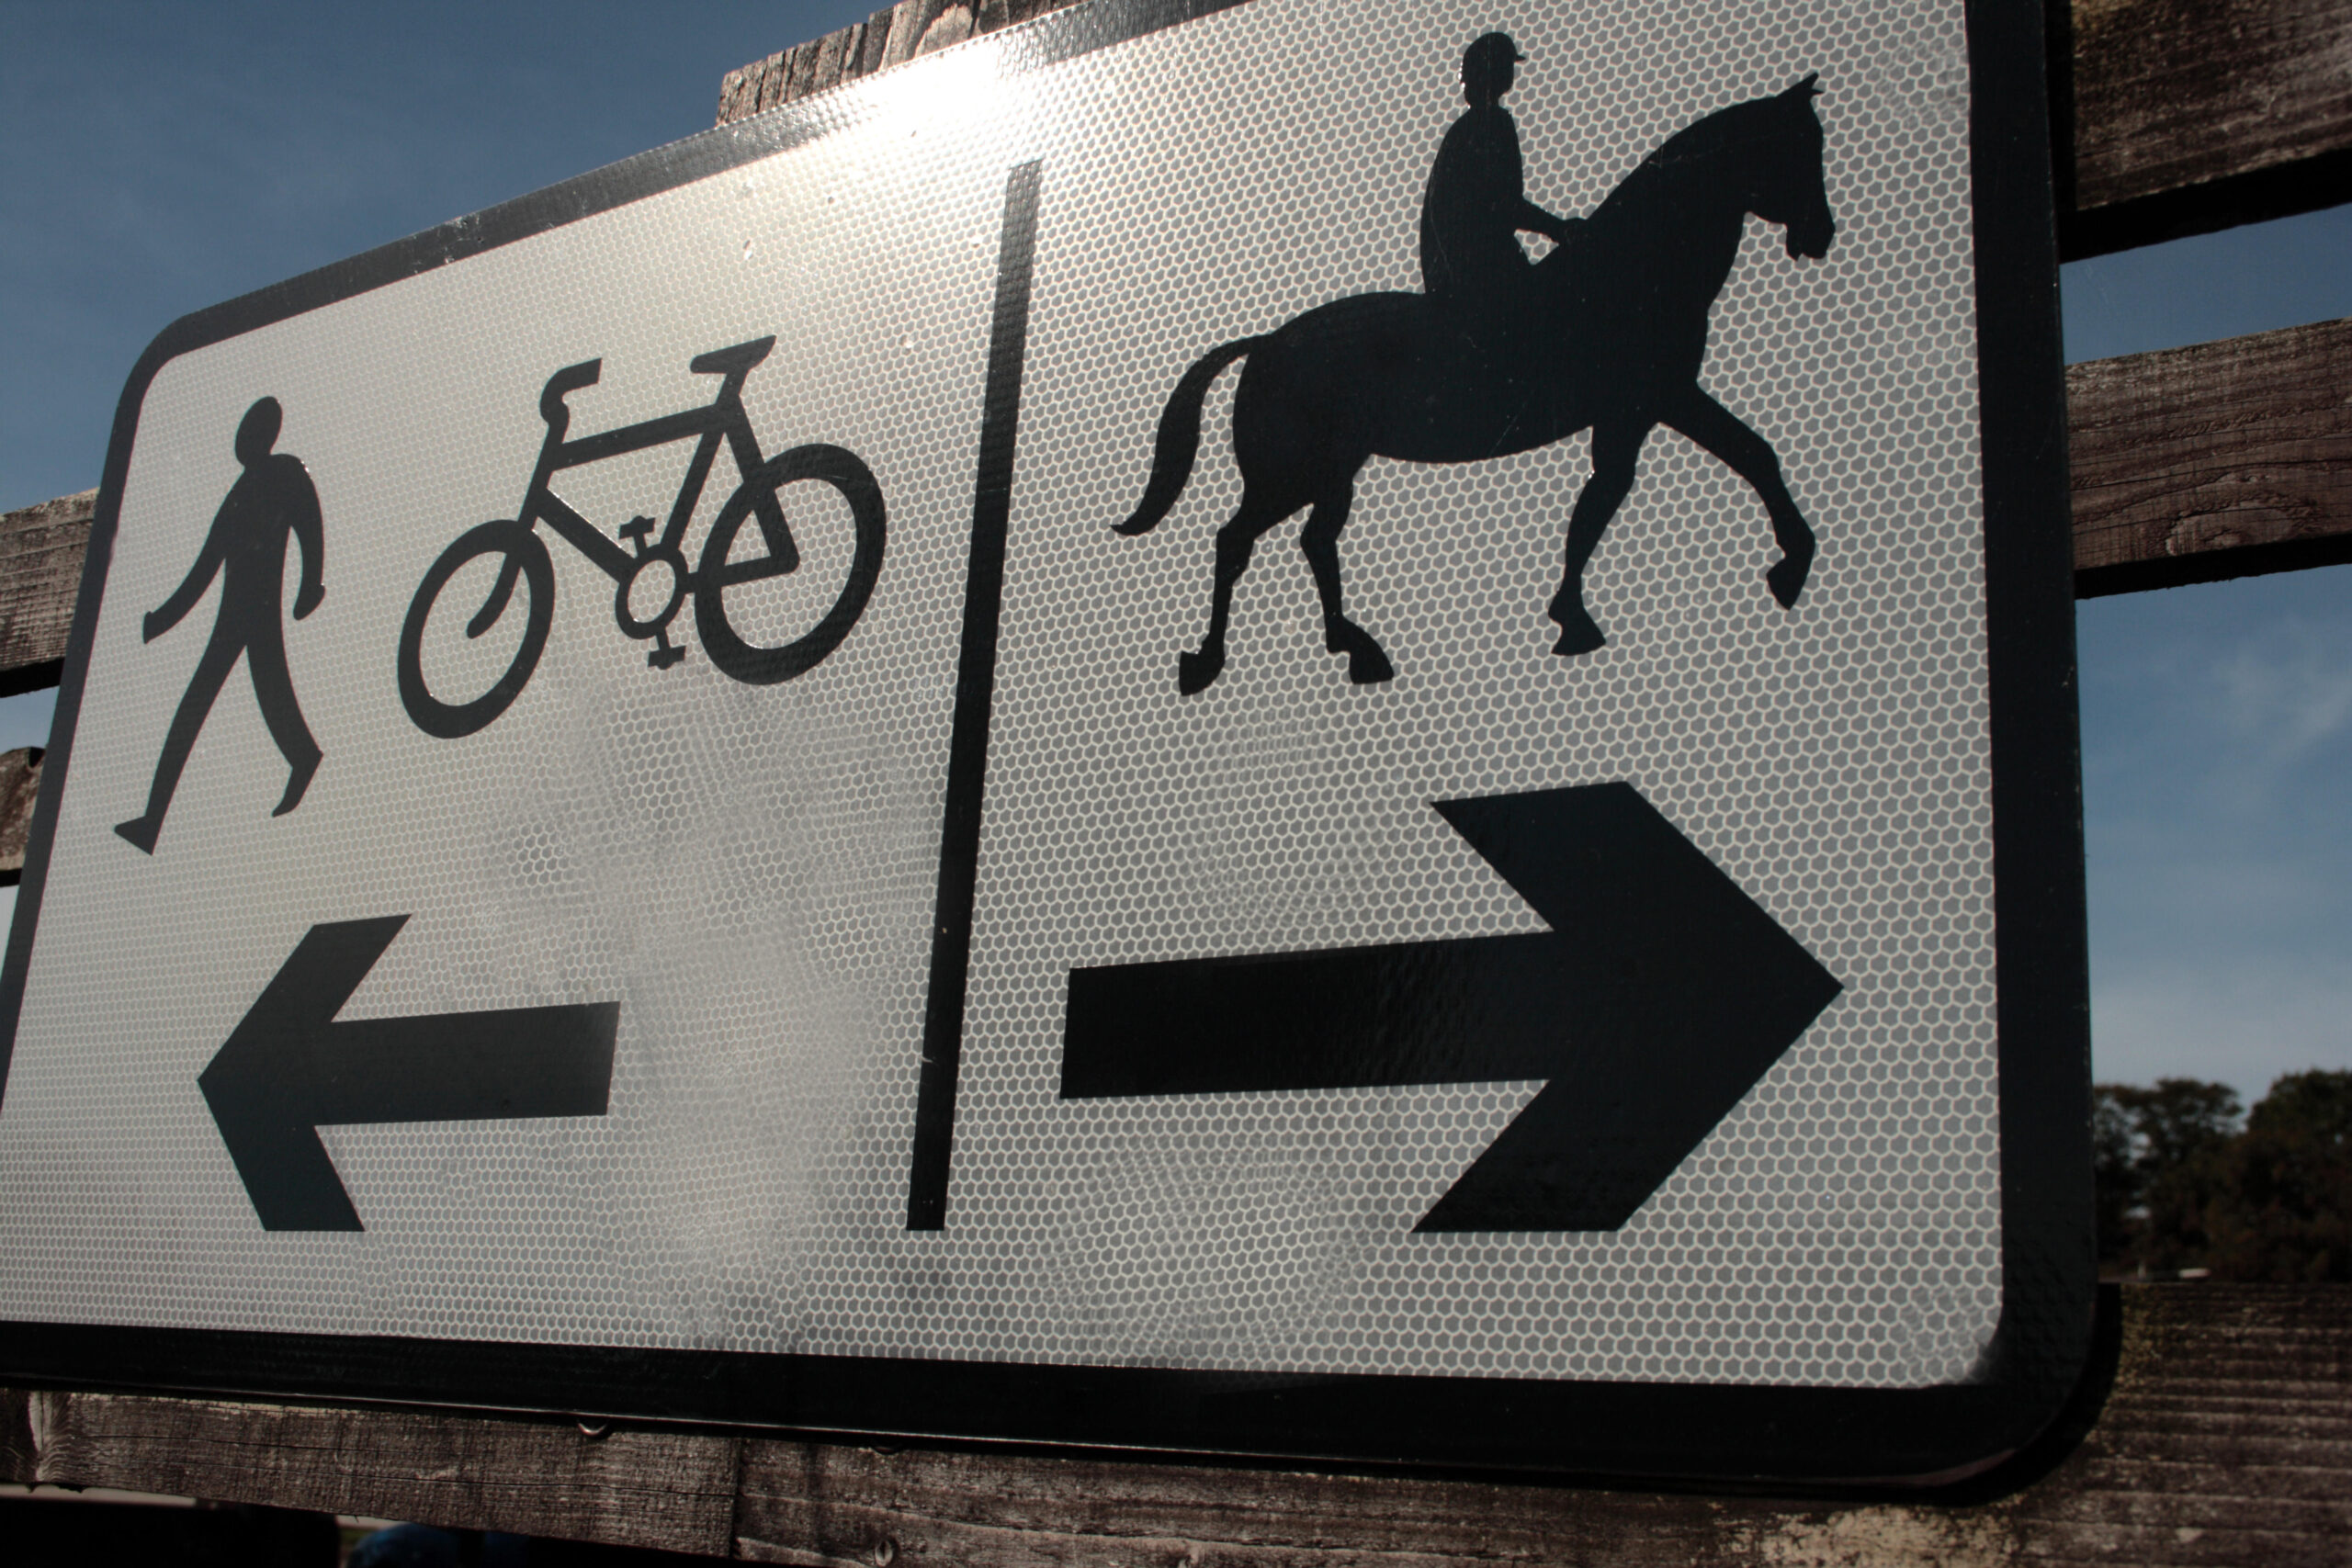 sign post for equestrians, cyclists and pedestrians